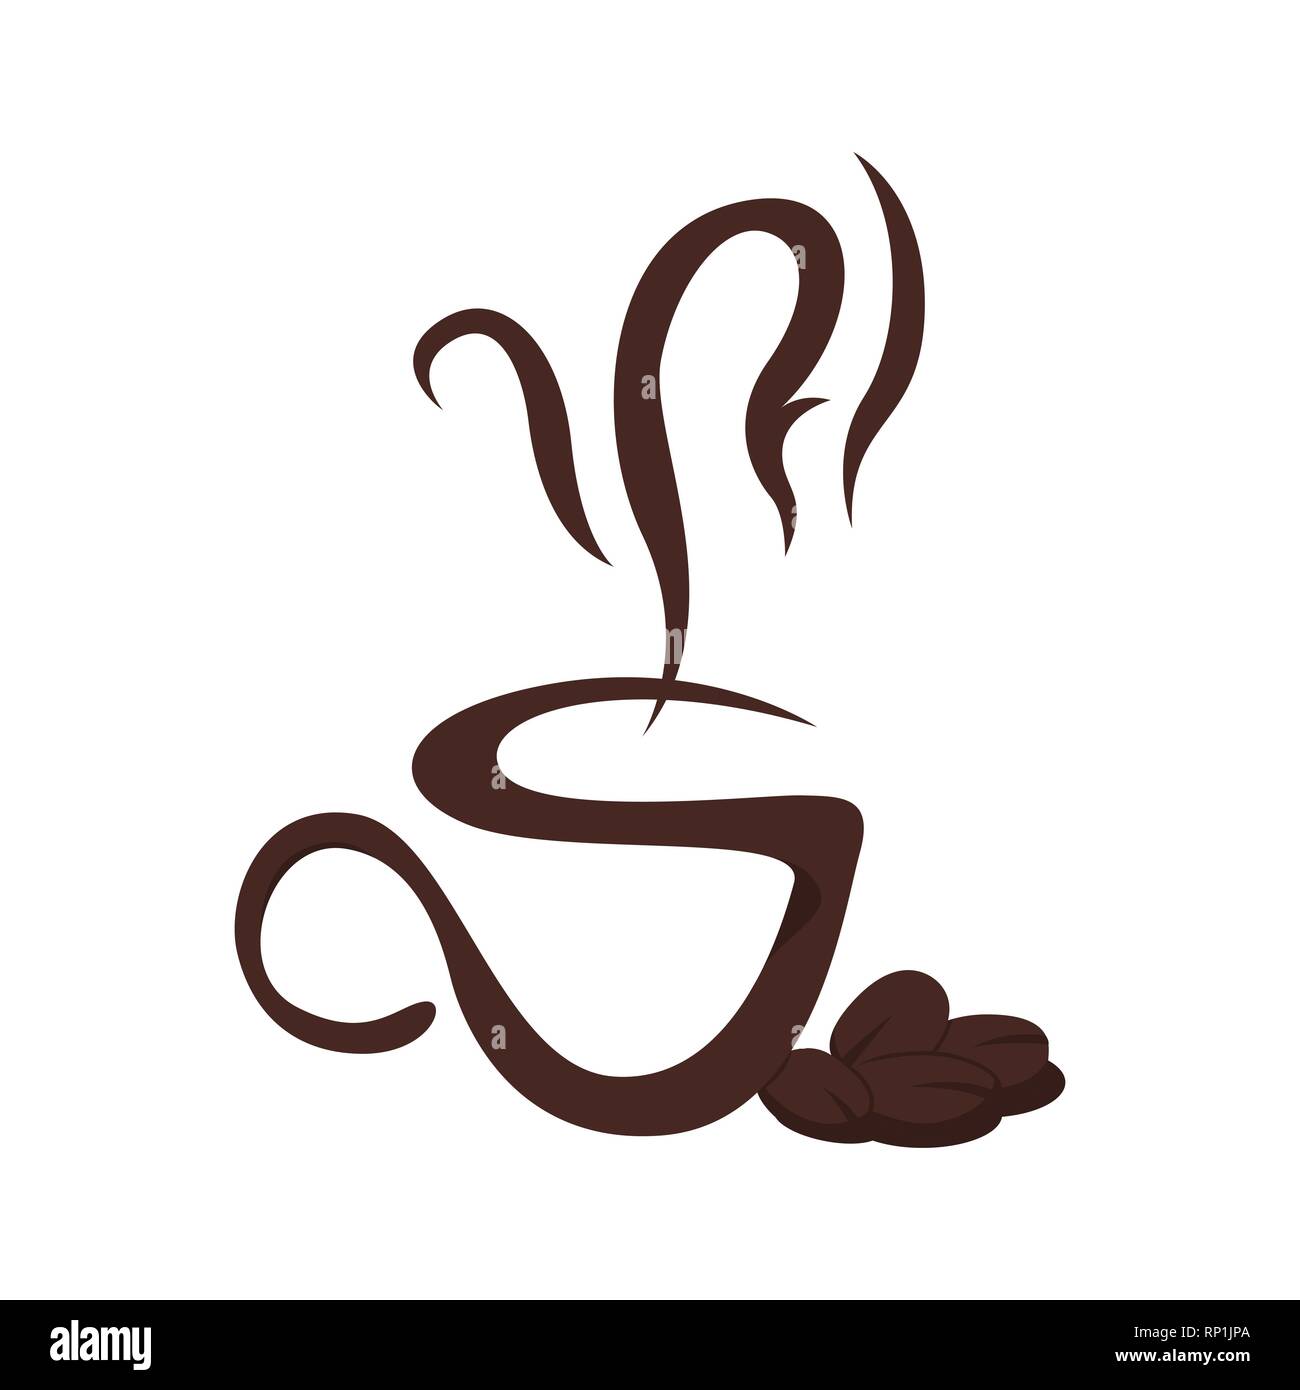 Coffee shop logo template natural abstract coffee cup. Coffee house emblem creative cafe logotype modern trendy symbol design vector illustration Stock Vector